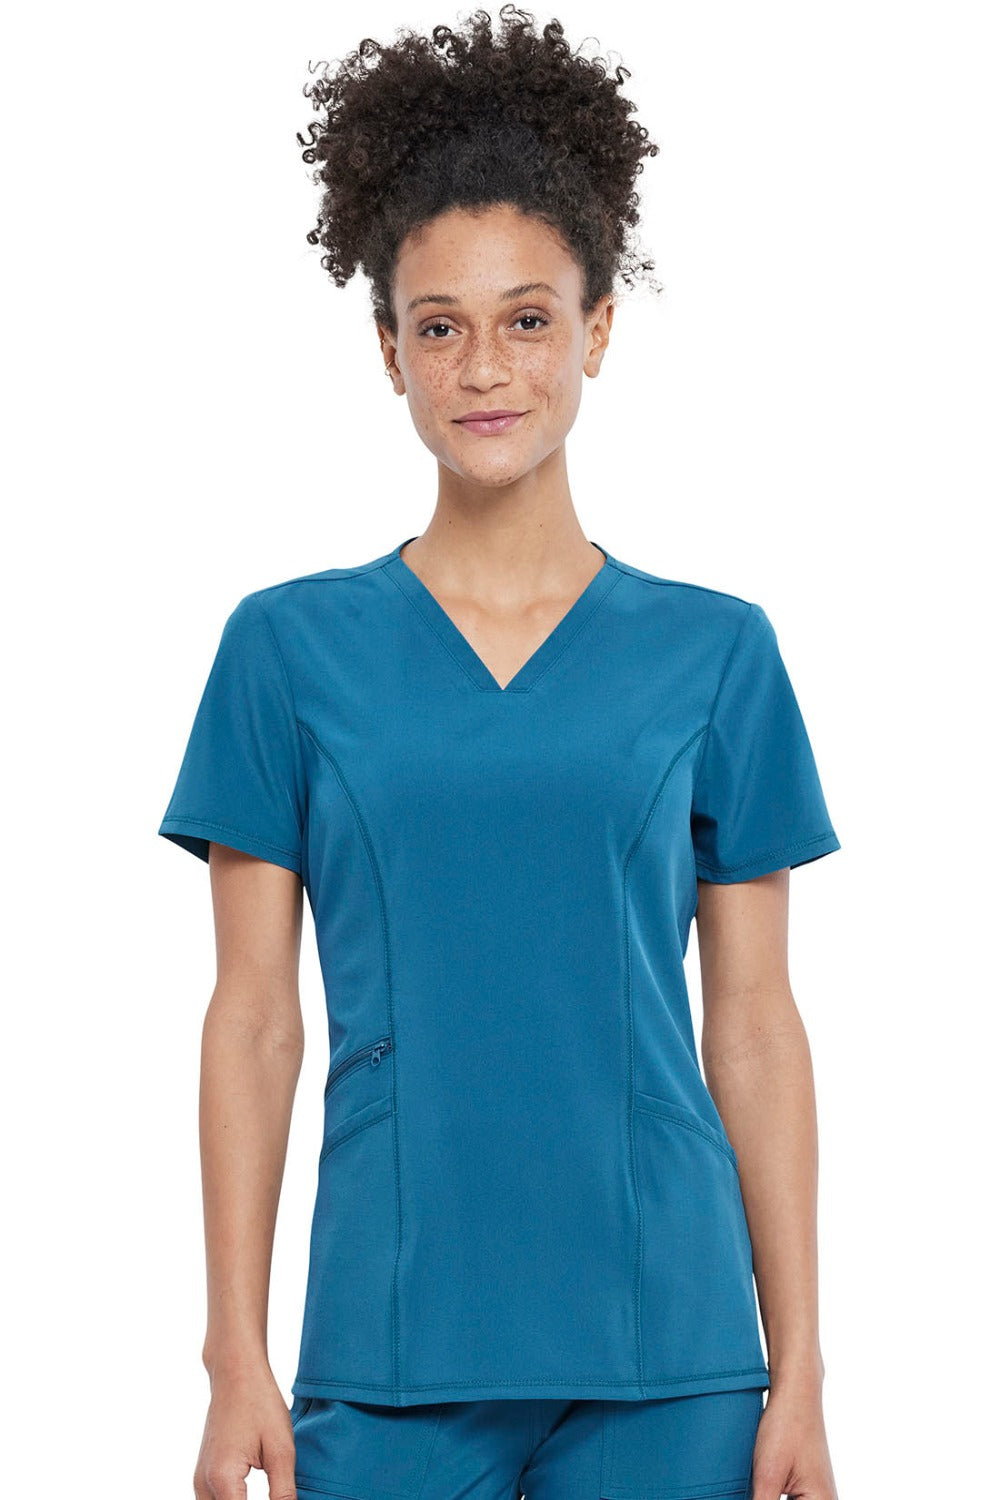 Cherokee Allura V-Neck Scrub Top in Caribbean at Parker's Clothing and Shoes.